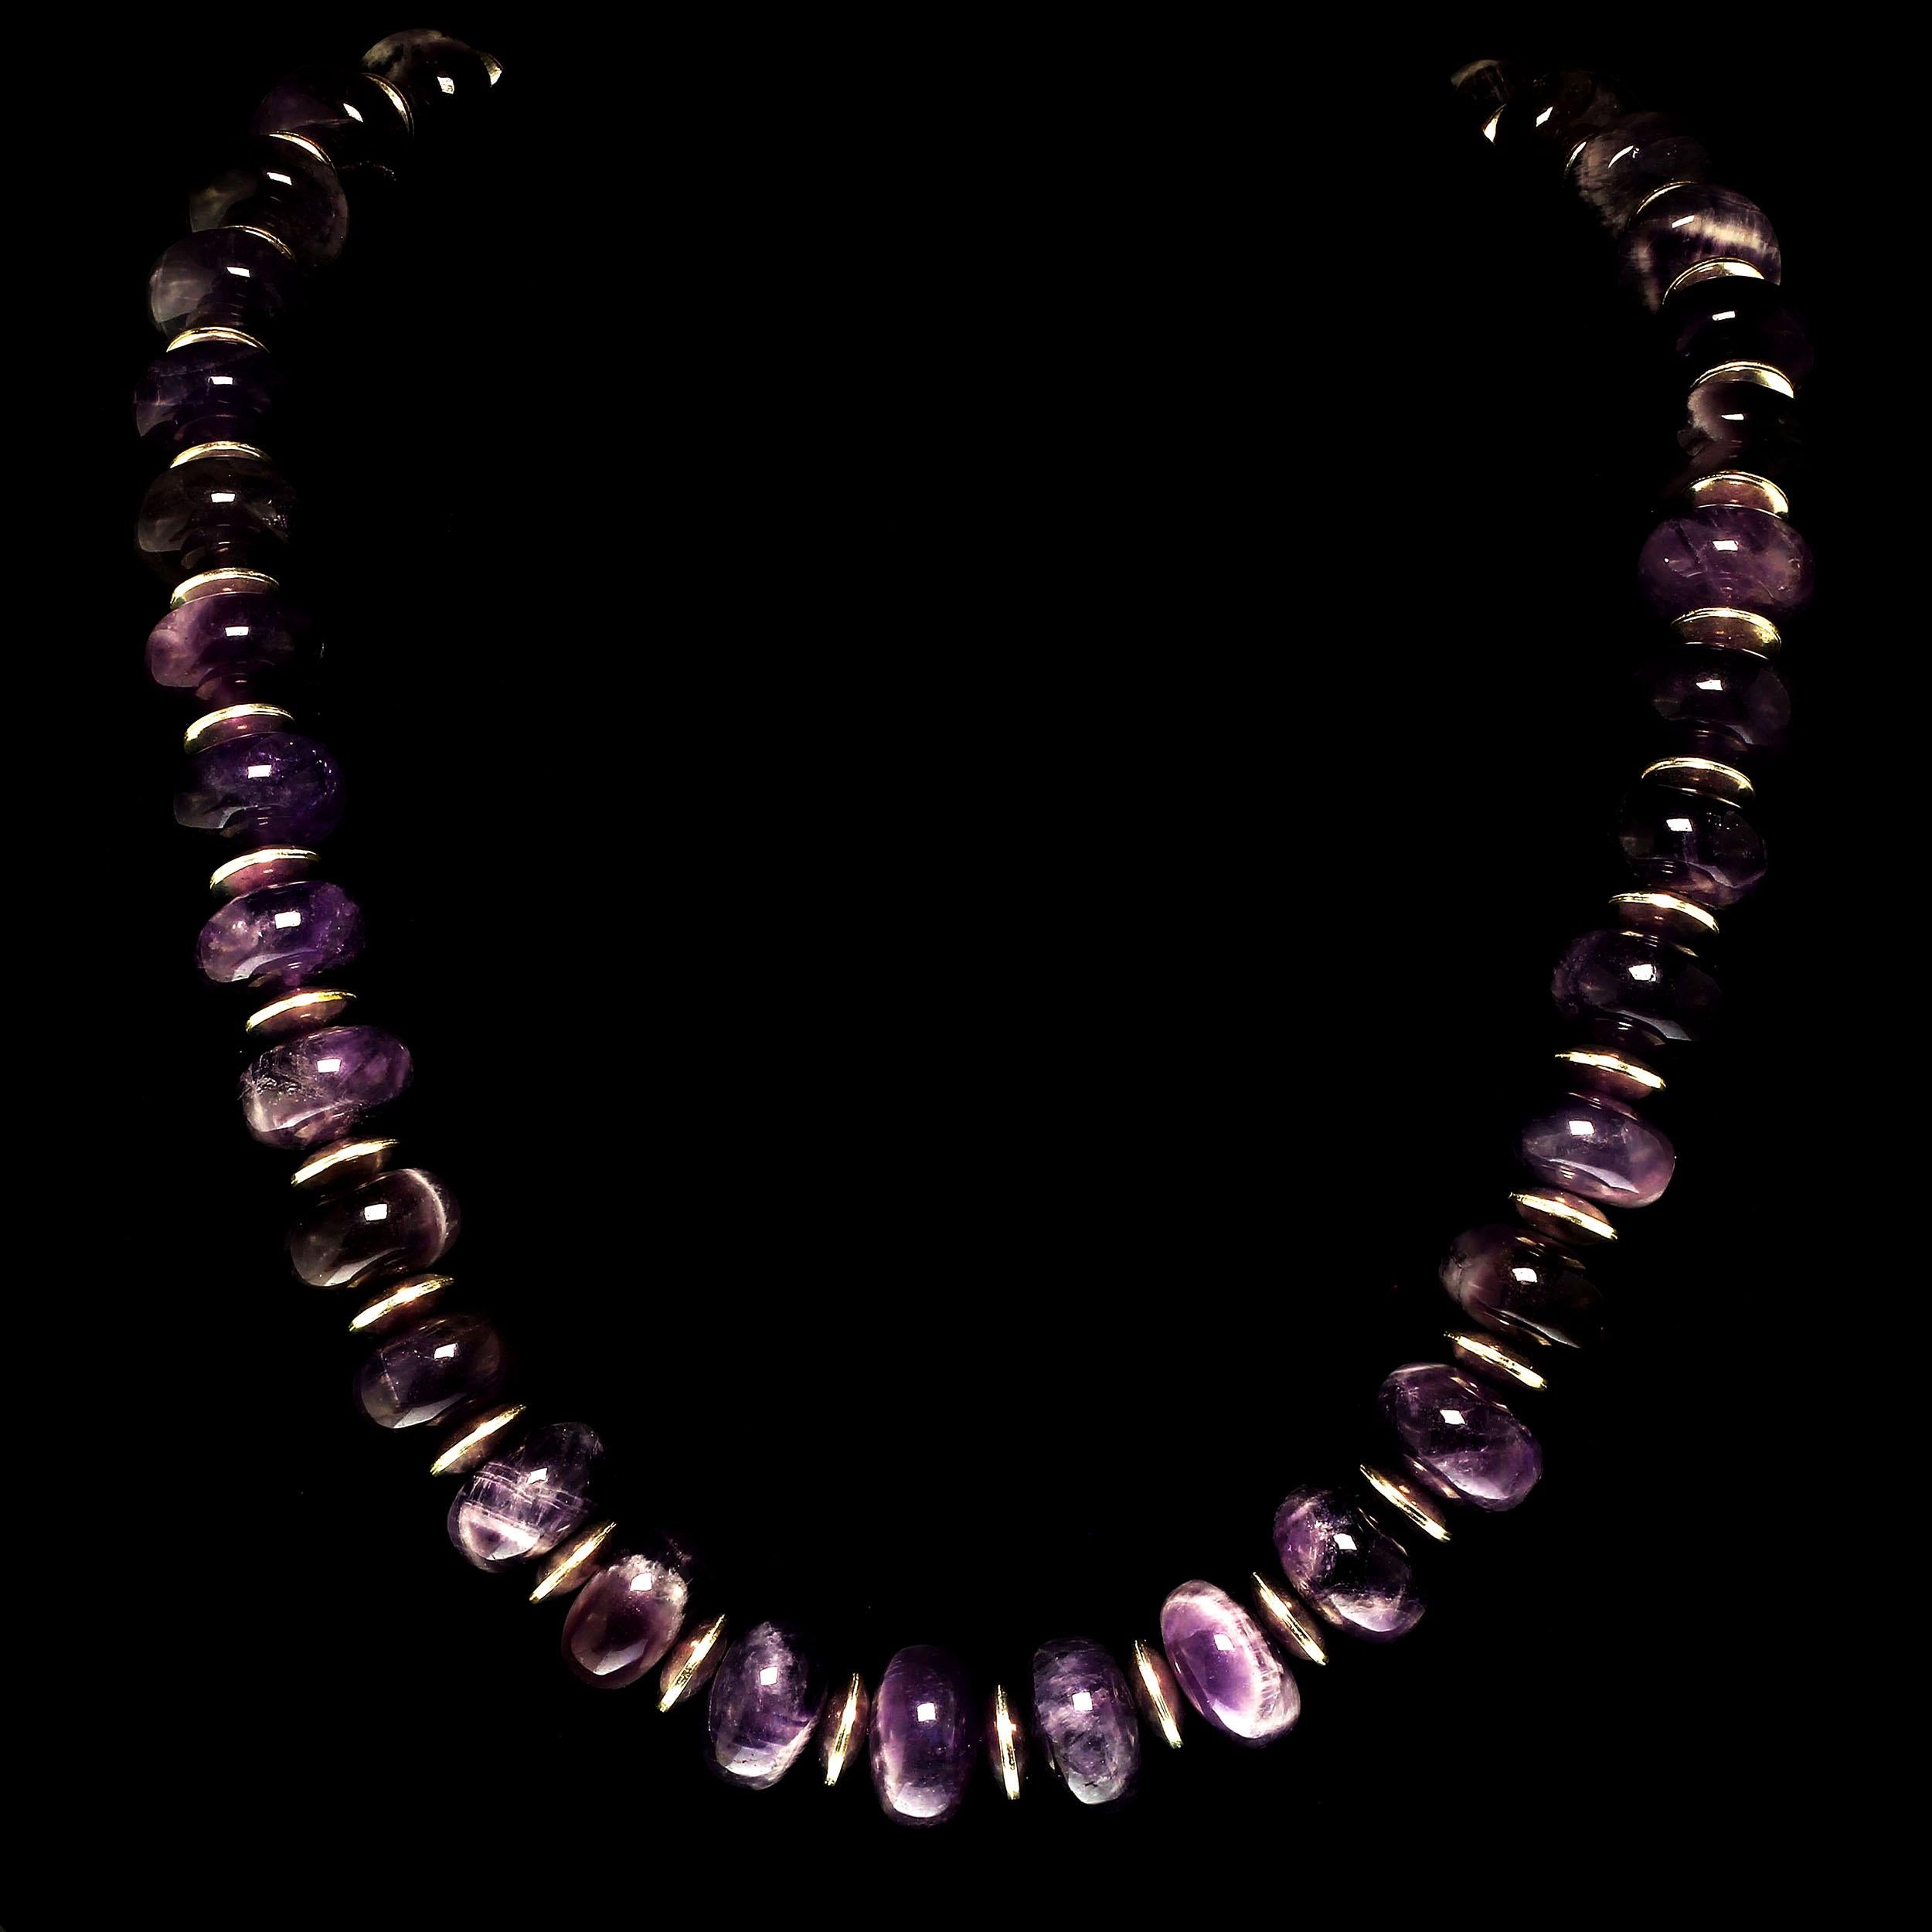 16 MM Highly Polished Cabochon Rondelles of Amethyst in Matrix necklace. The Amethyst is accented with 10 MM silver tone enhancers and secured with a Sterling Silver Toggle clasp. The necklace is 27 inches in length. Amethyst is the February